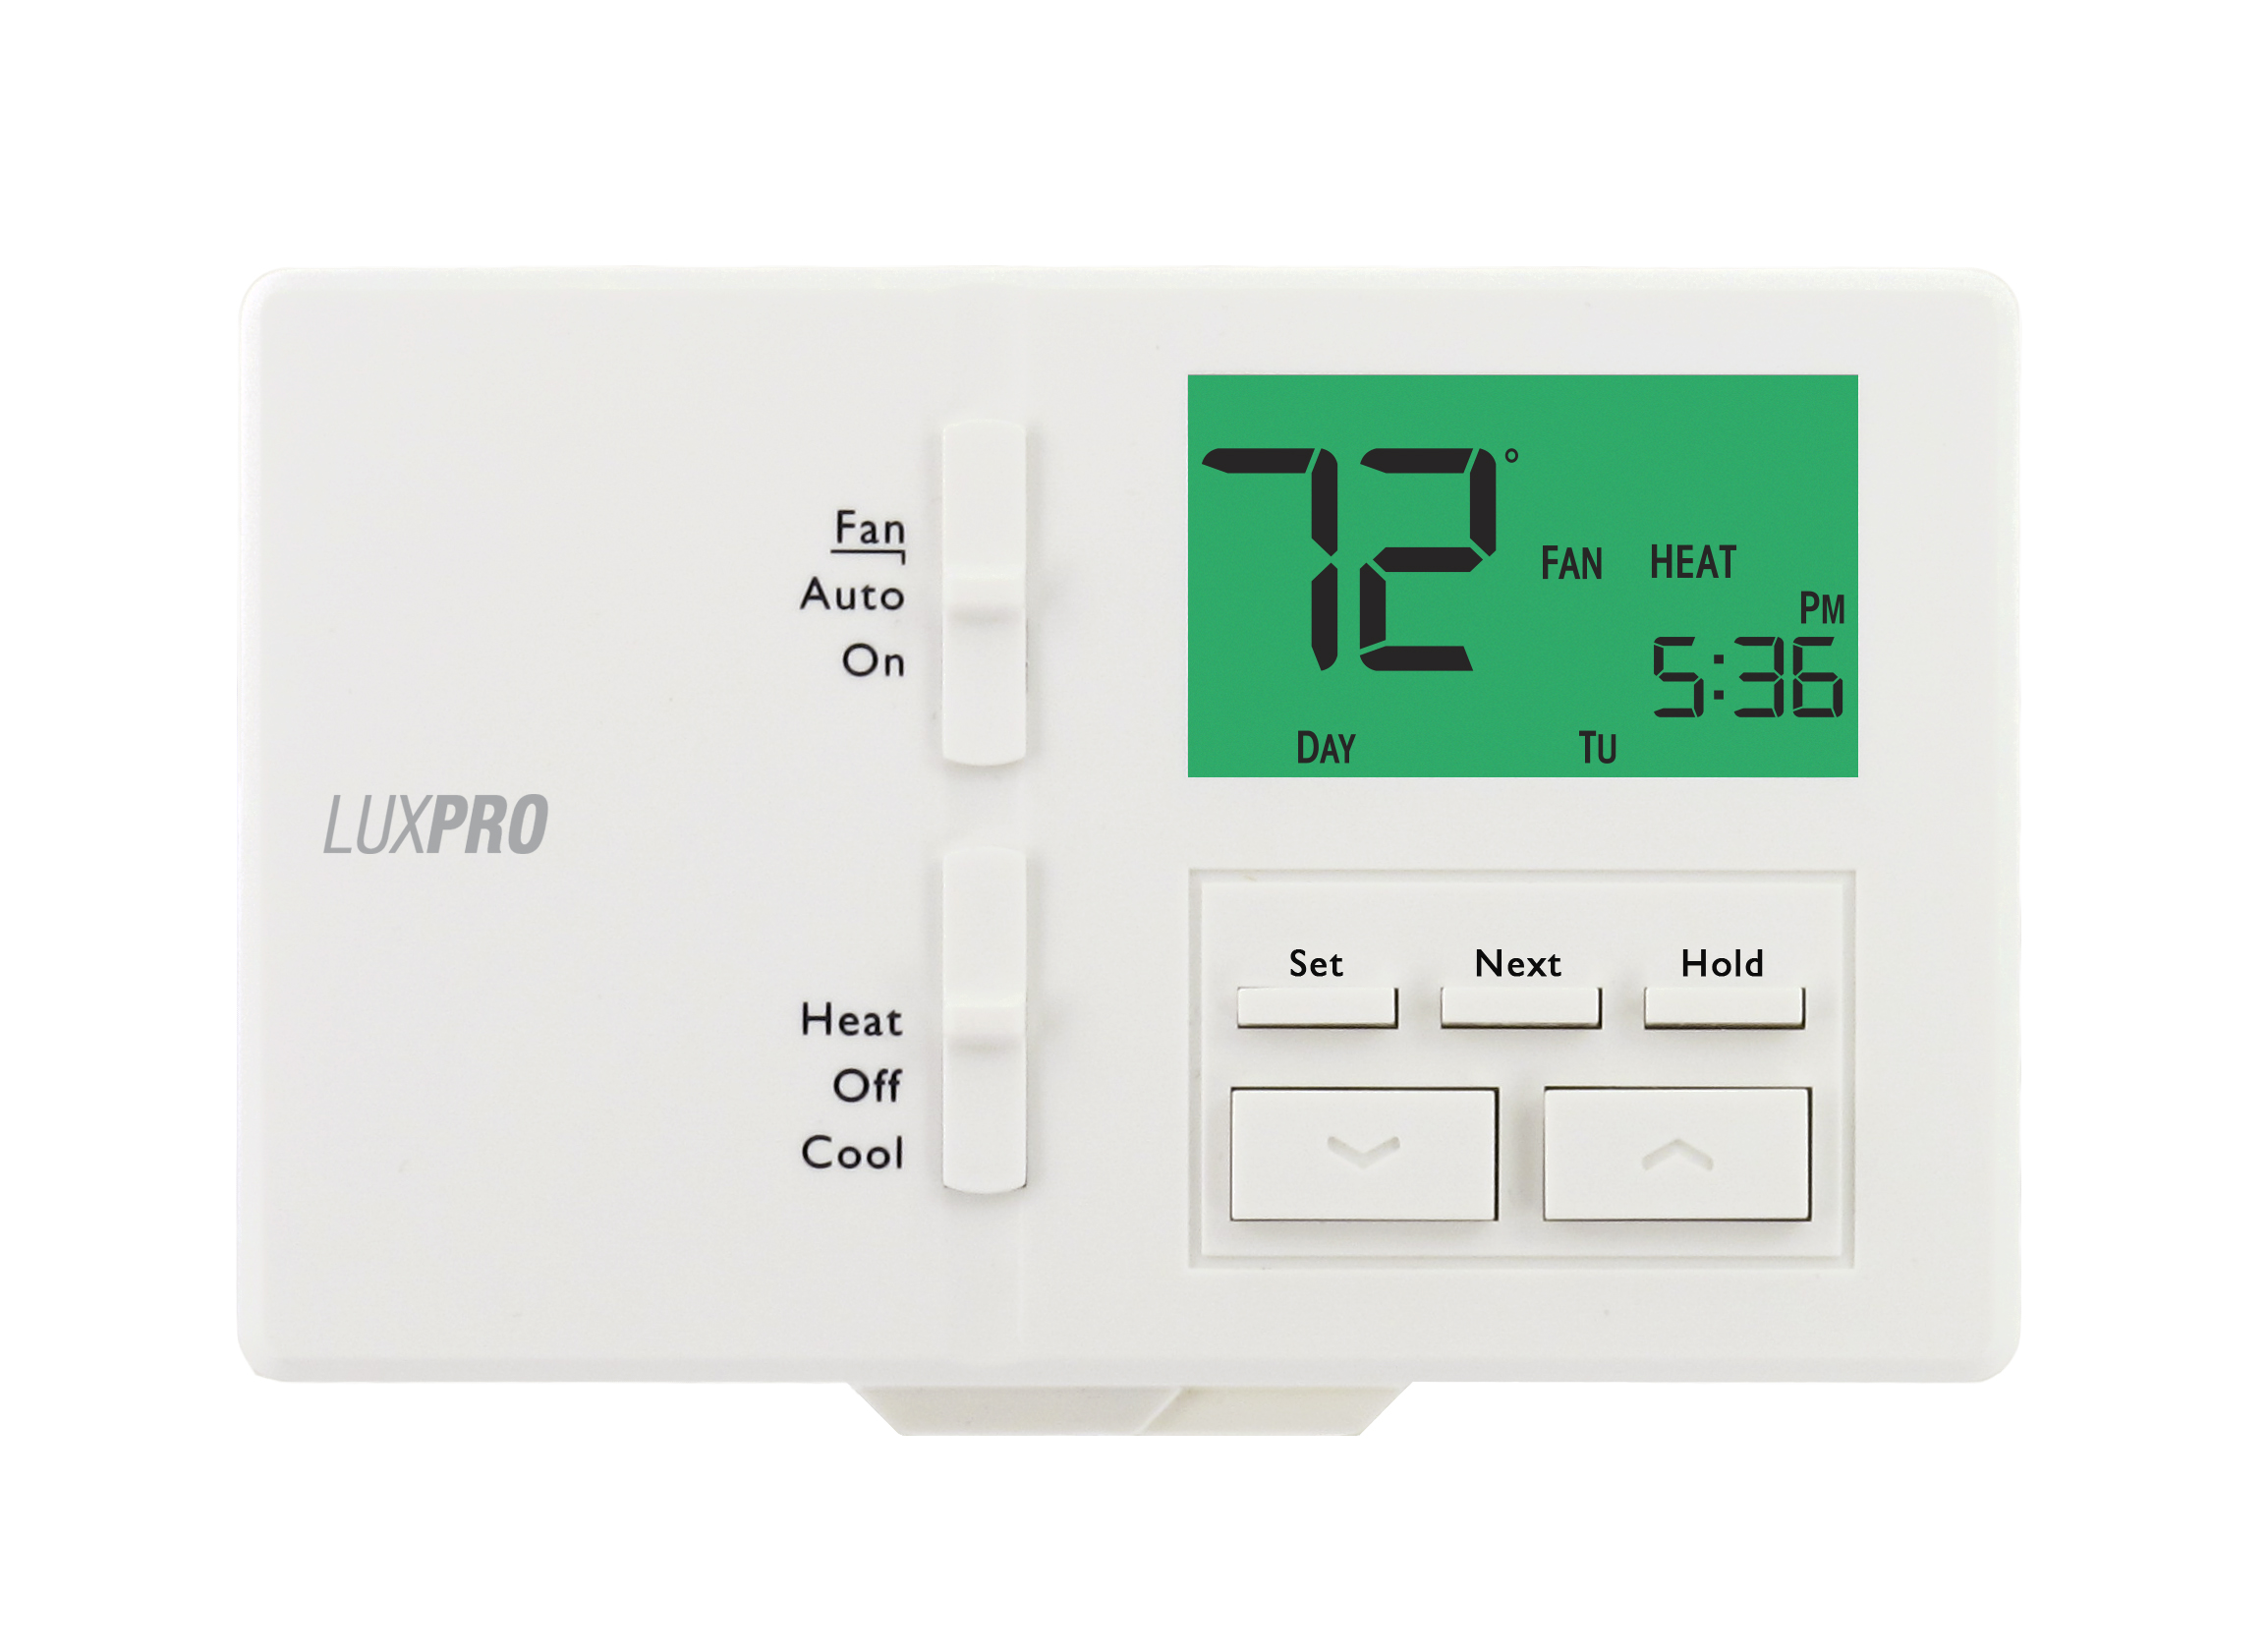 LUX P711 7-5/2-MANUAL H/C
THERMOSTAT GAS , OIL, MV,
BACKLIGHT, TEMP LIMITS,
LOCKOUT SETABLE FULLY
PROGRAMMABLE 5 YEAR WARRANTY